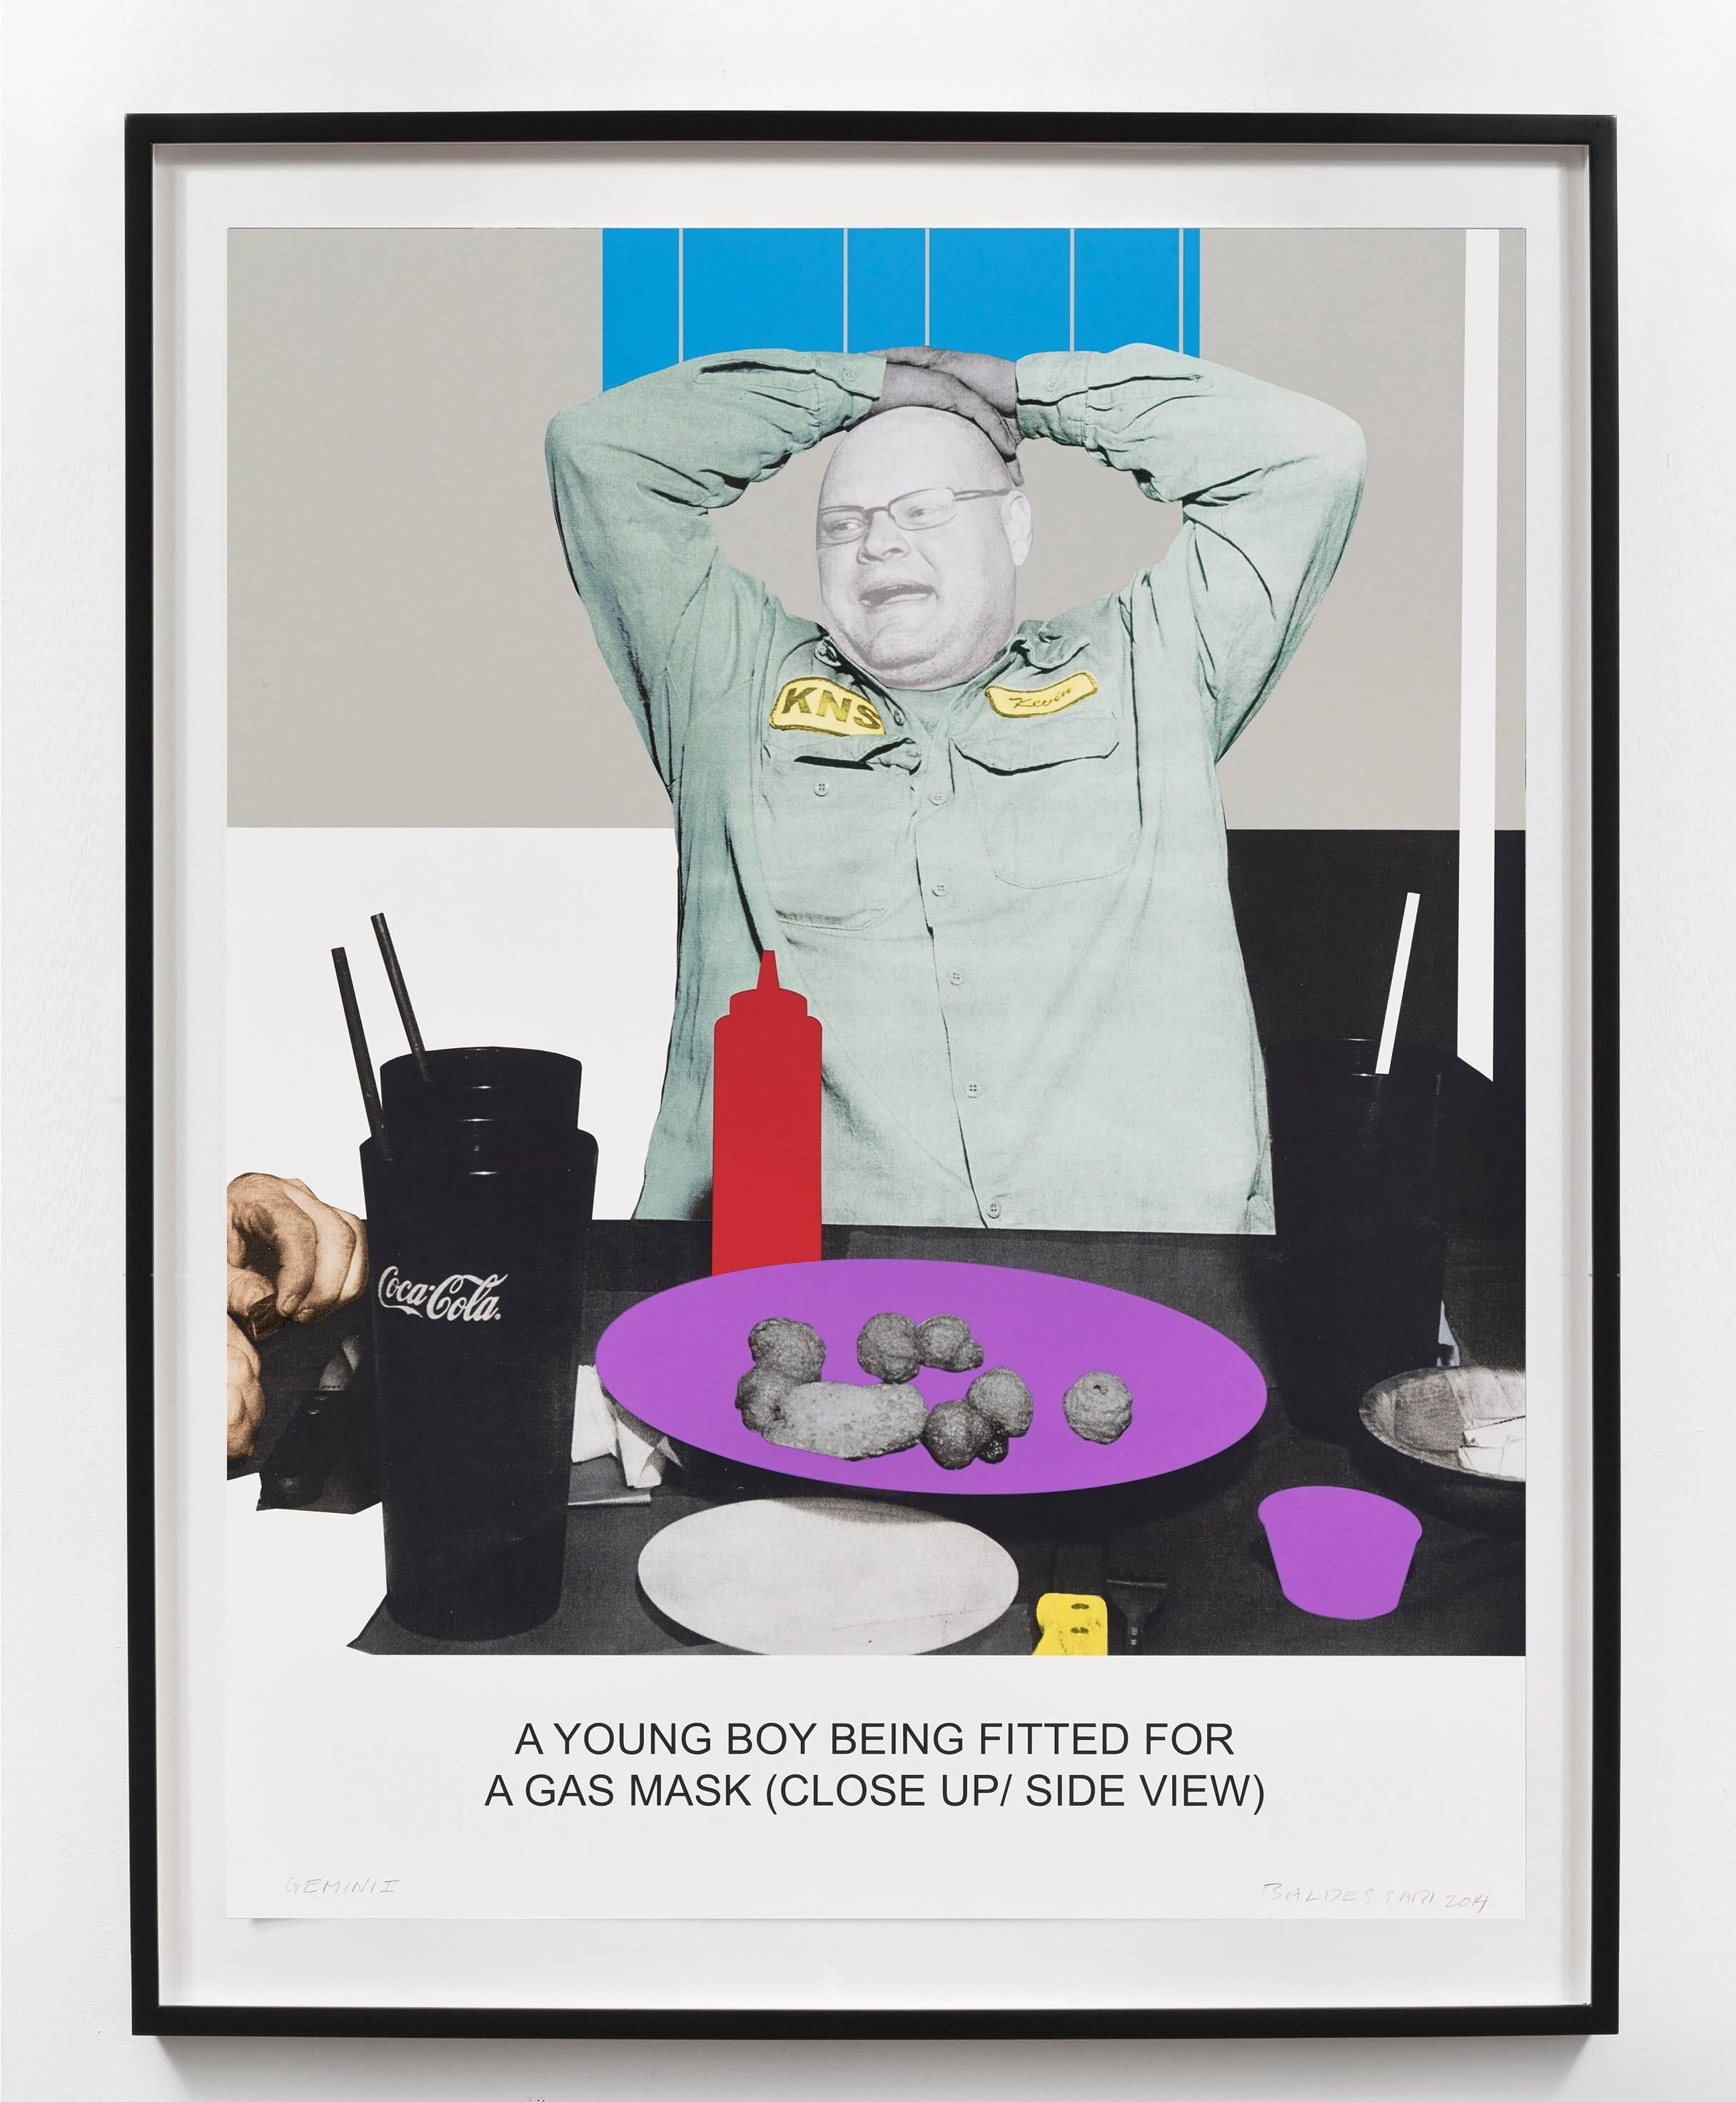 The News: A Young Boy Being Fitted for a Gas Mask... - Print by John Baldessari